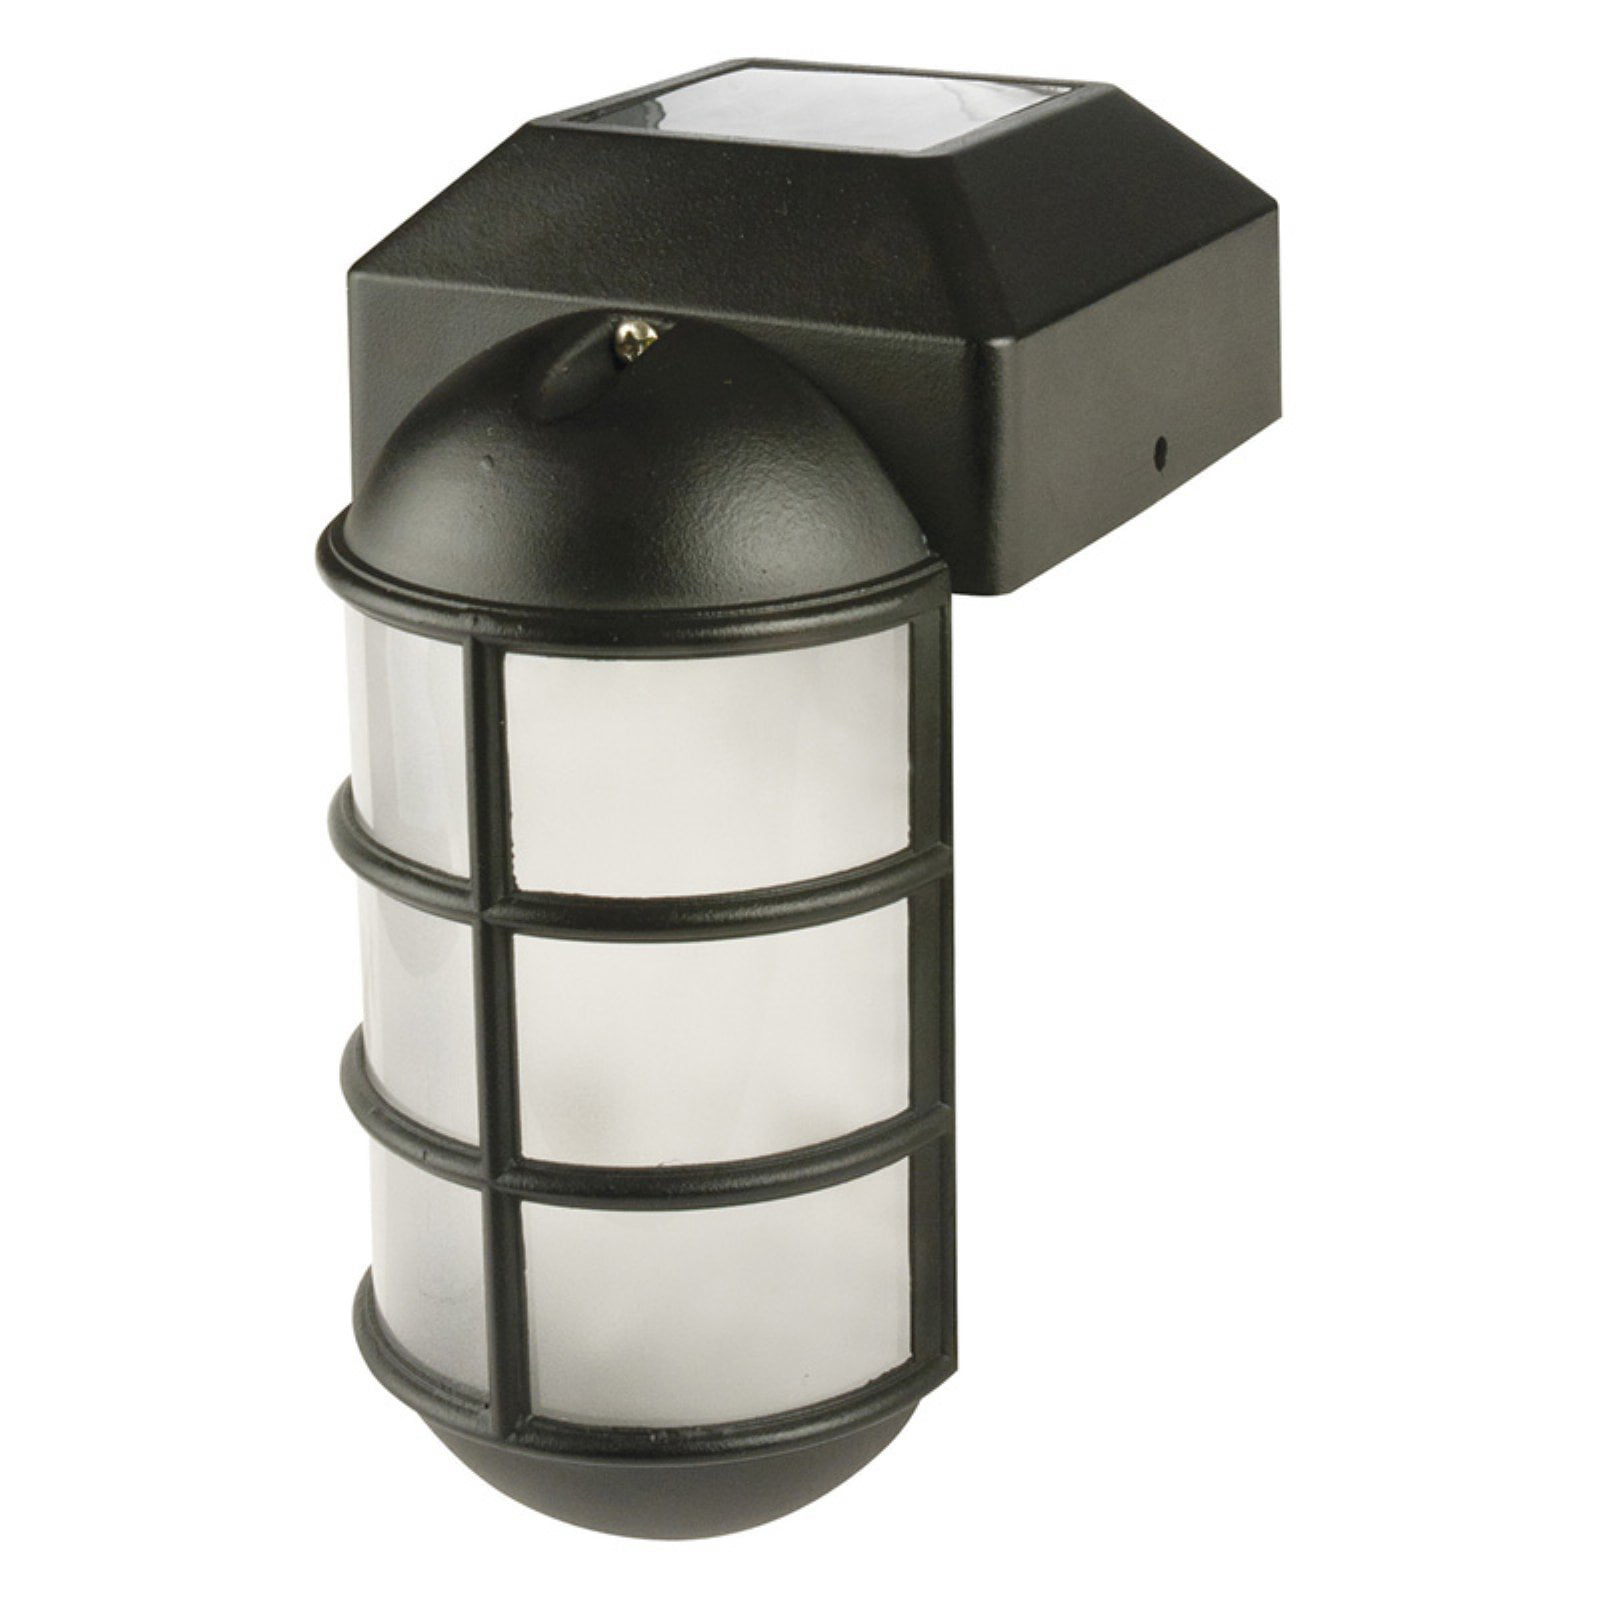 Add lighting. Led Deck Lamp. Protective cap for Landscape Lighting Systems.